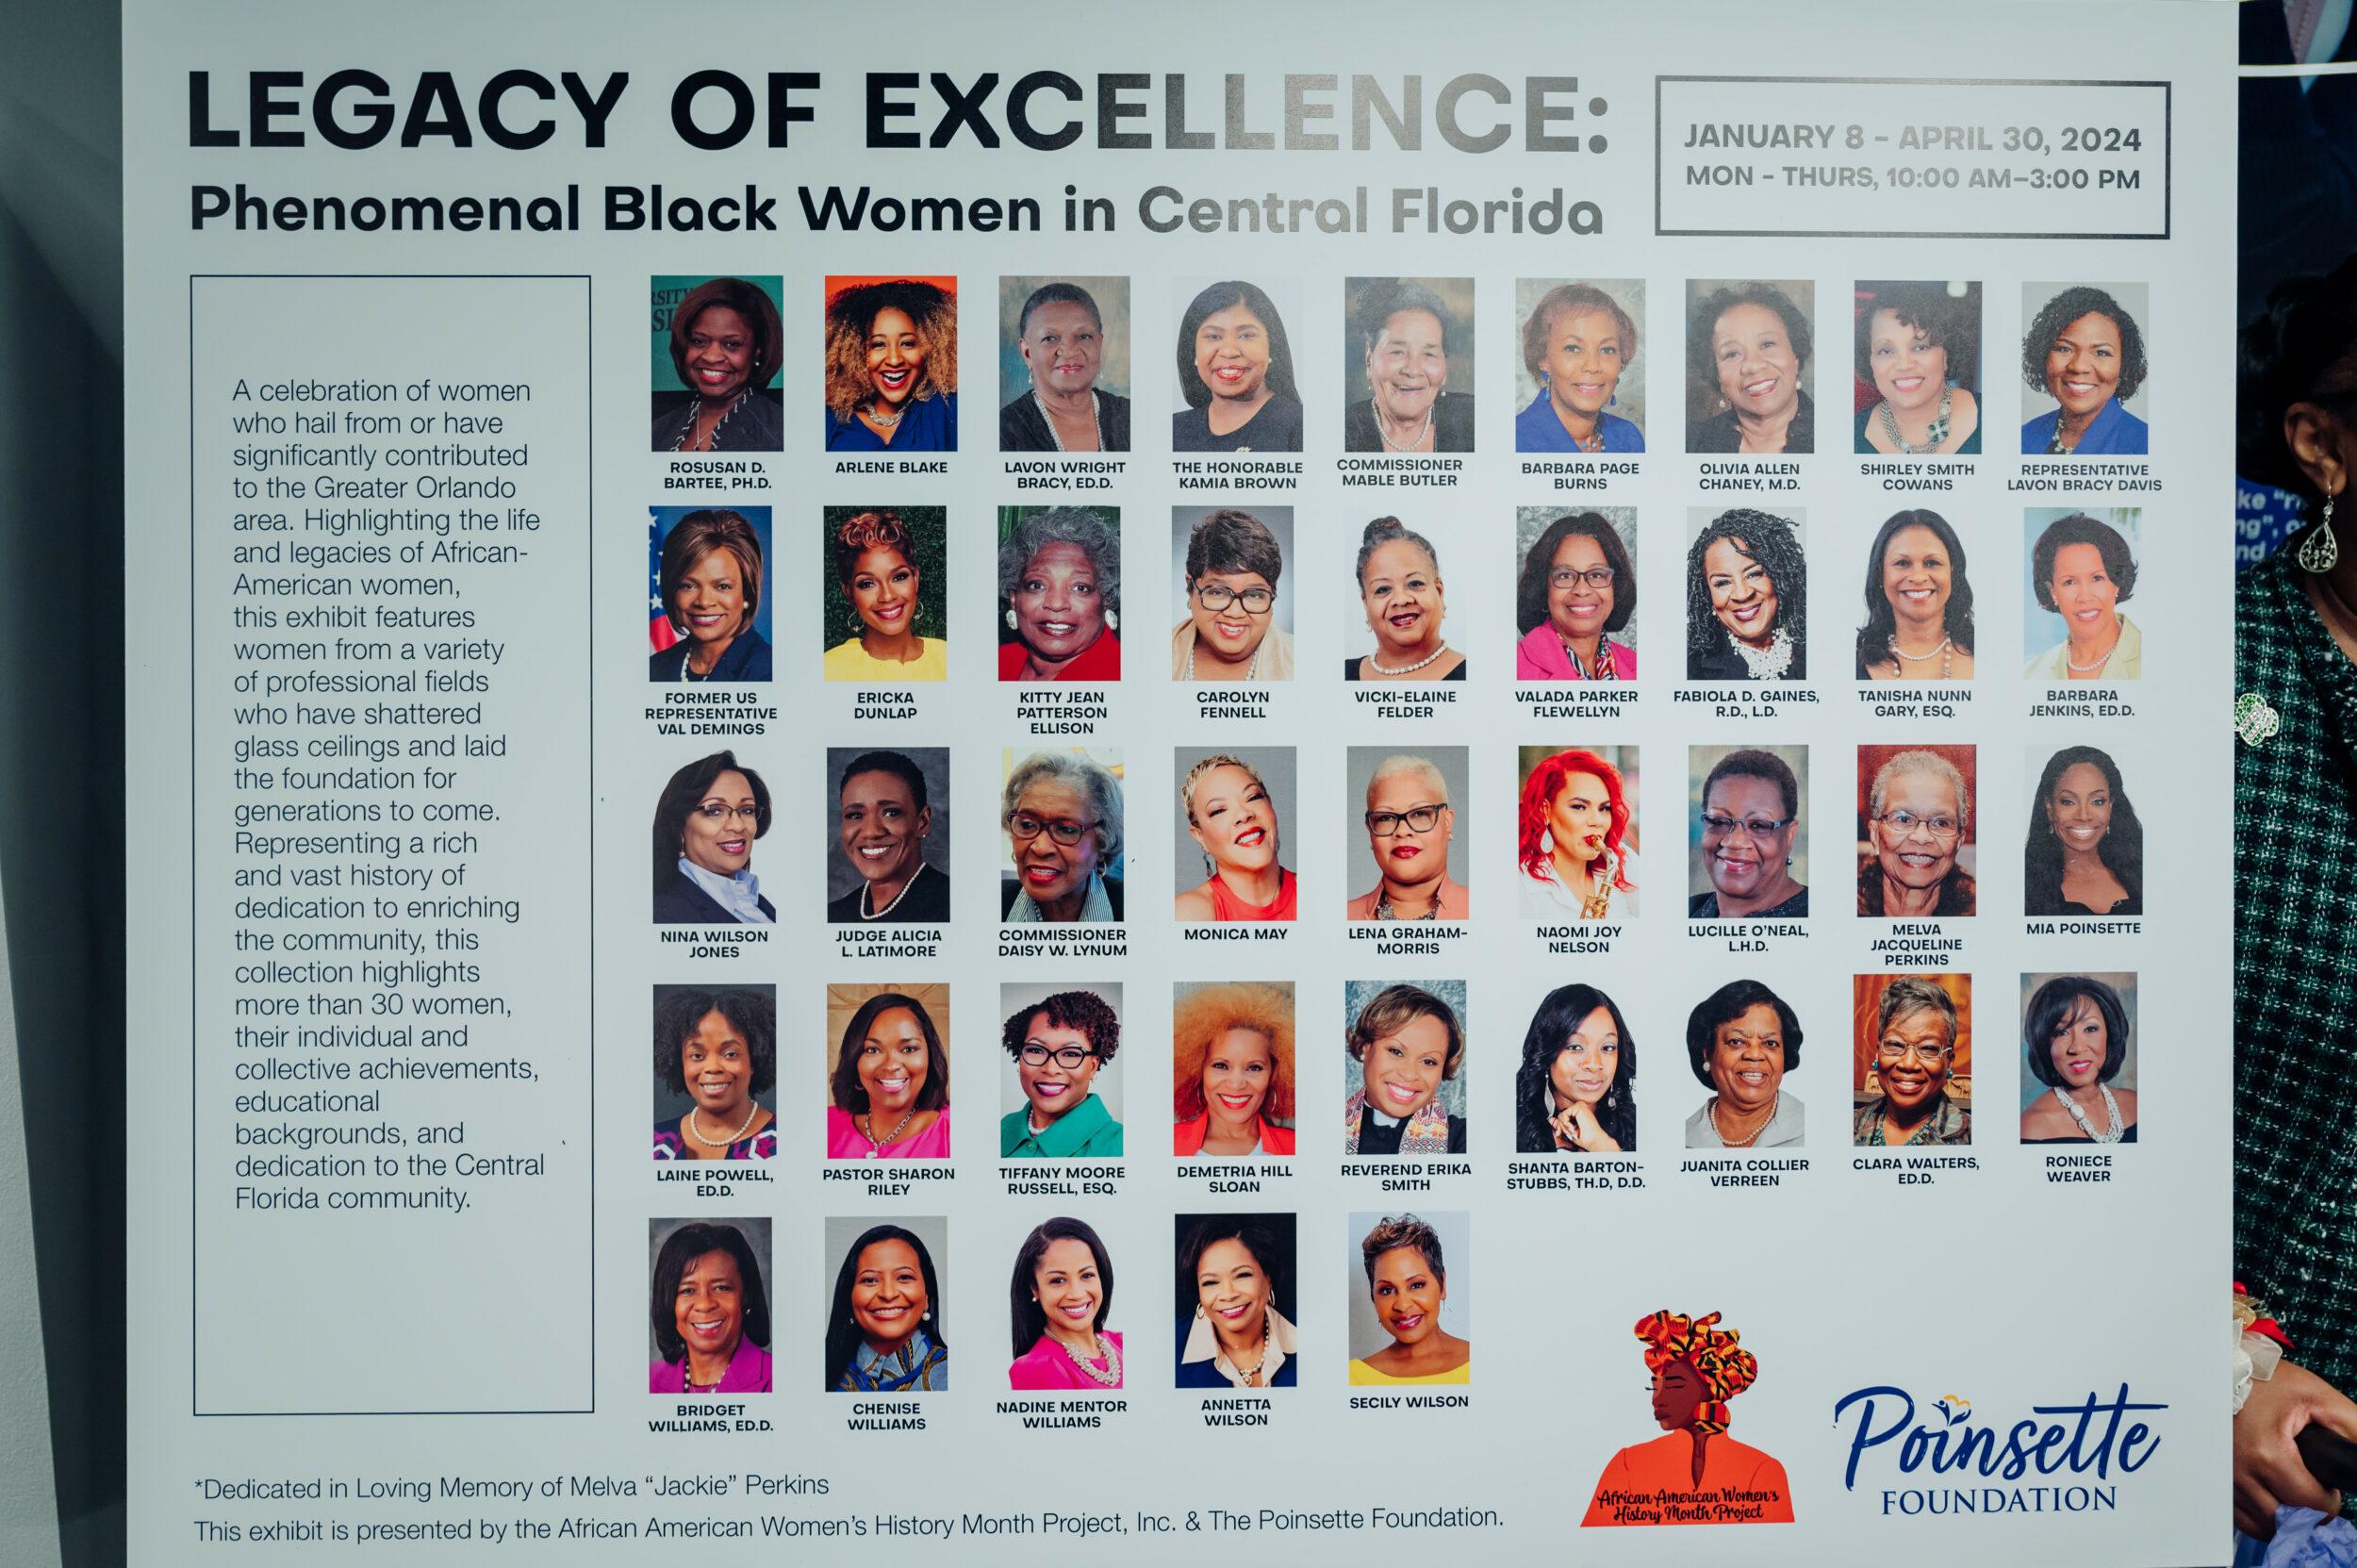 Photo of the Legacy of Excellence Black women in Central Florida.